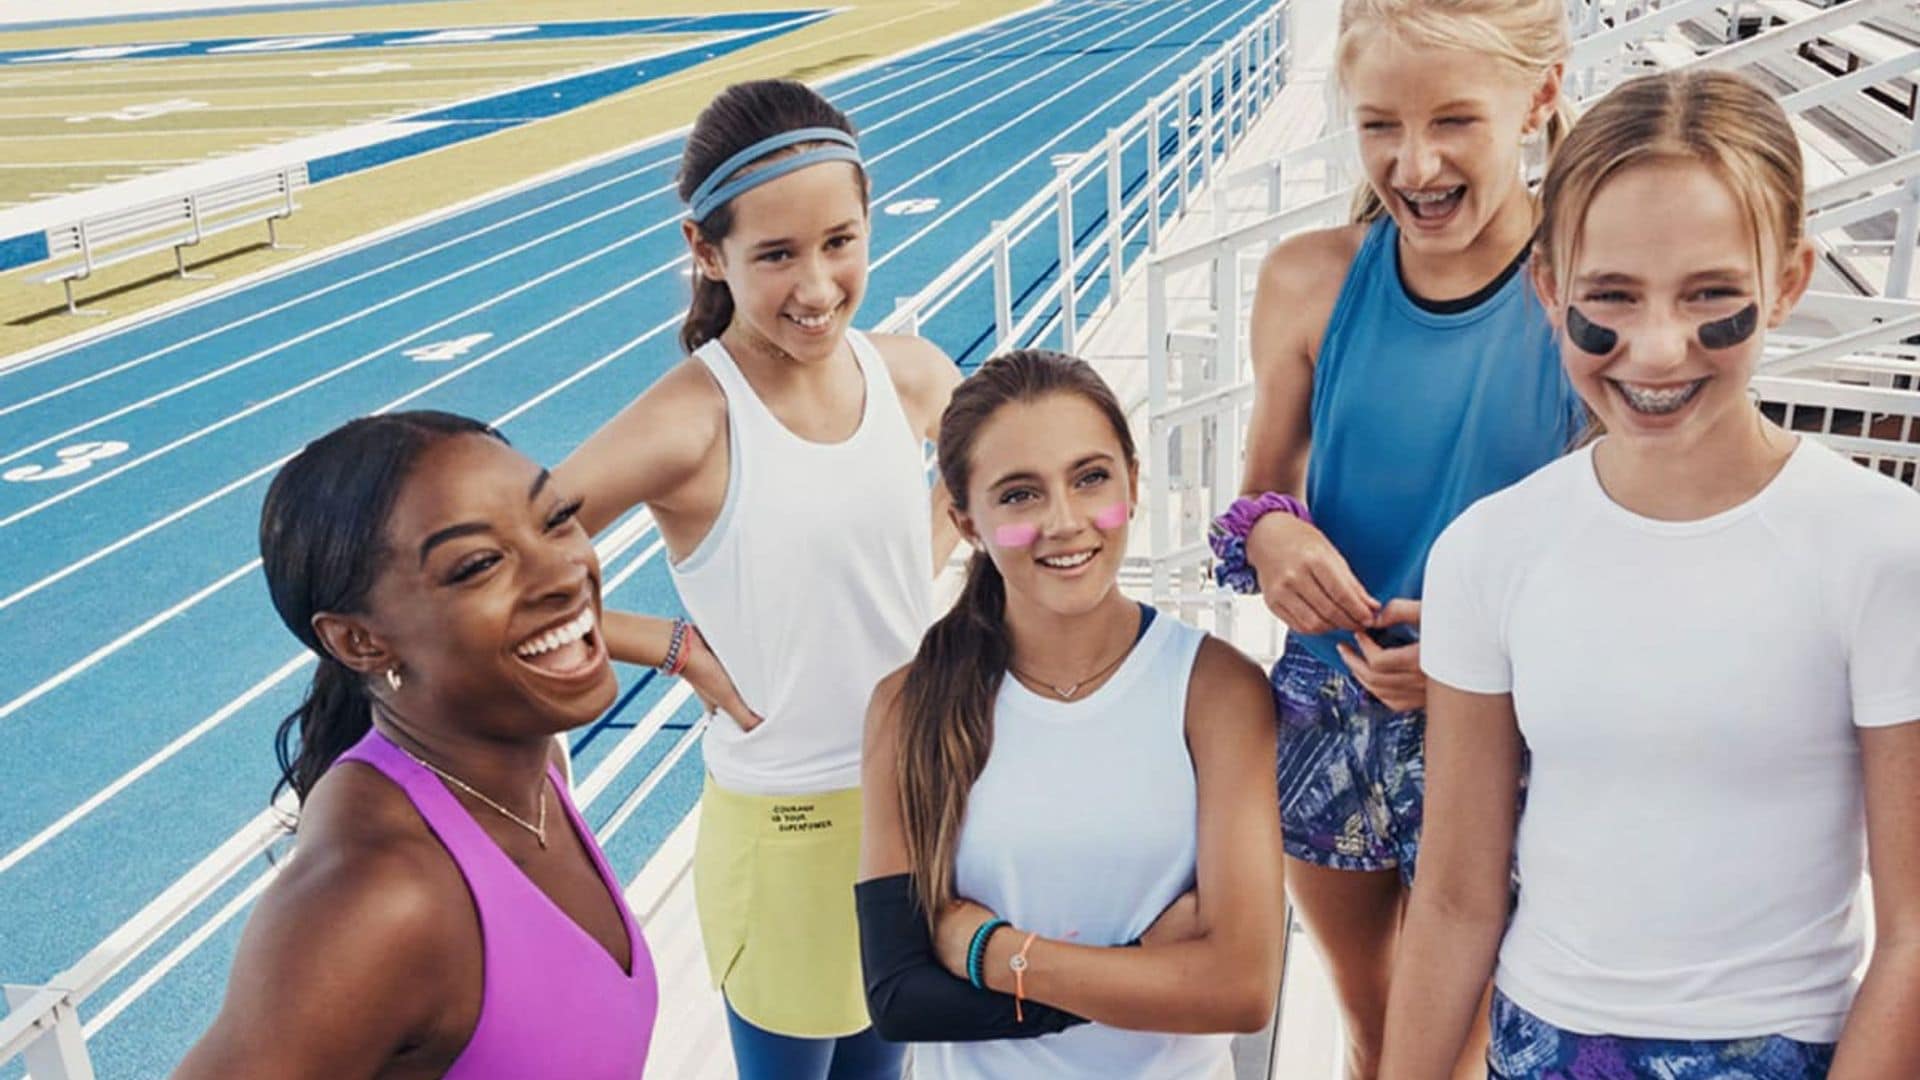 Simone Biles drops a capsule collection with Athleta so girls can discover their style